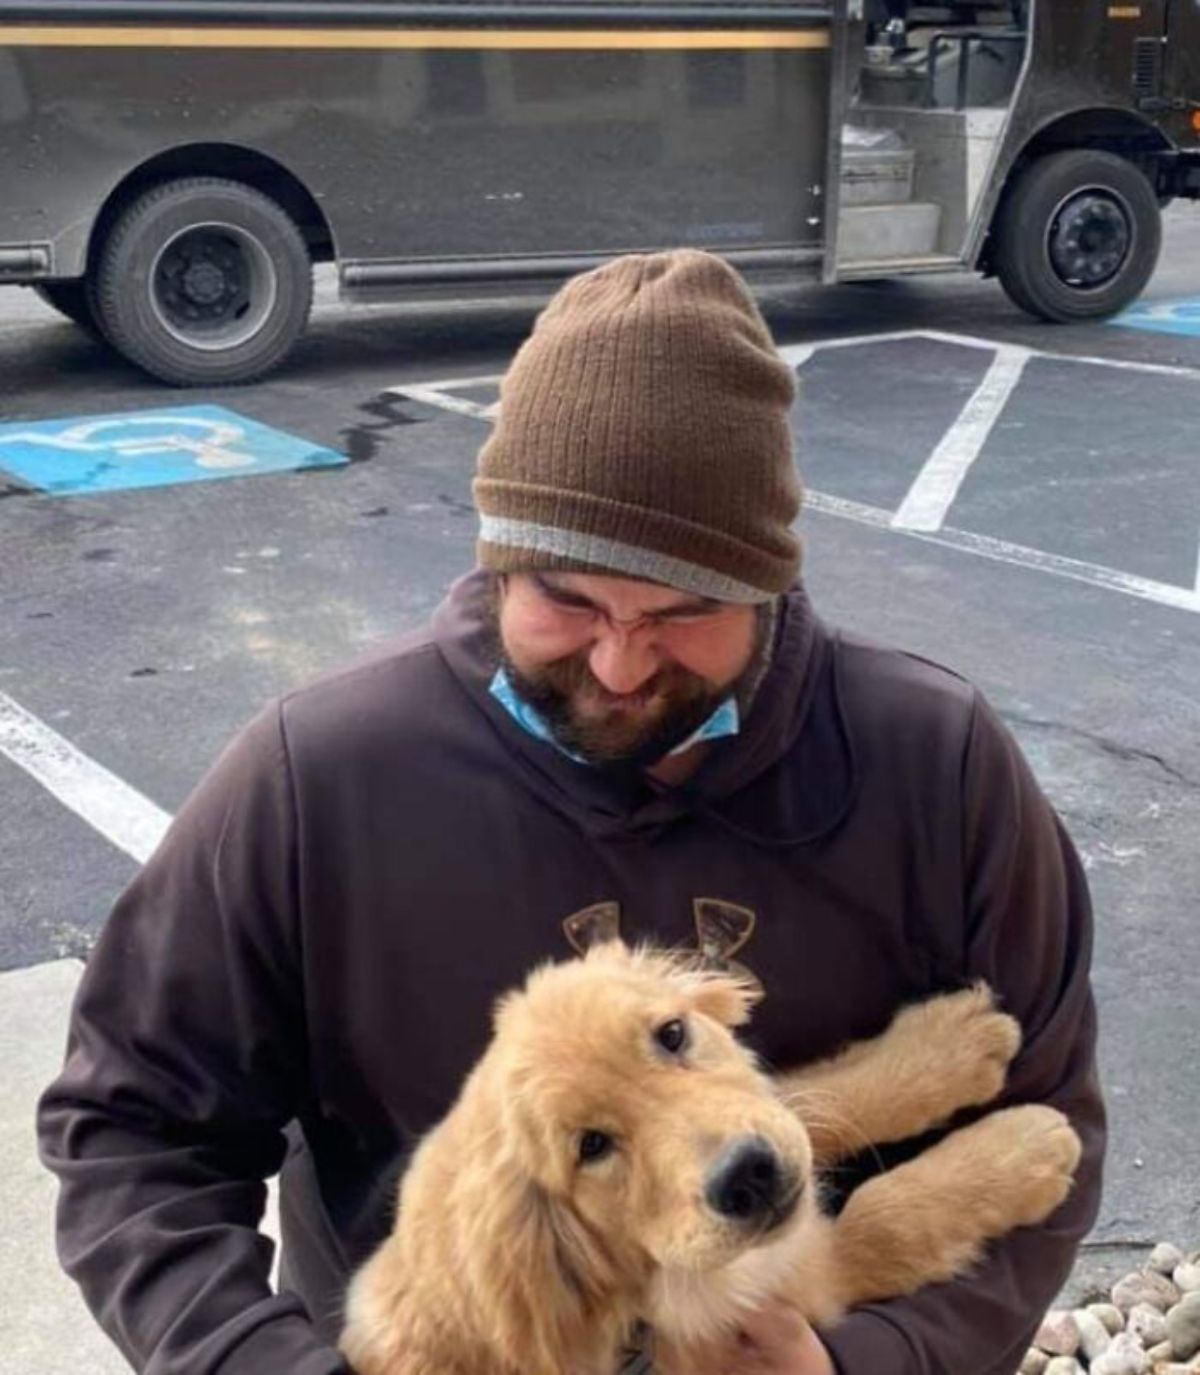 male ups driver with a golden retriever puppy on the lap